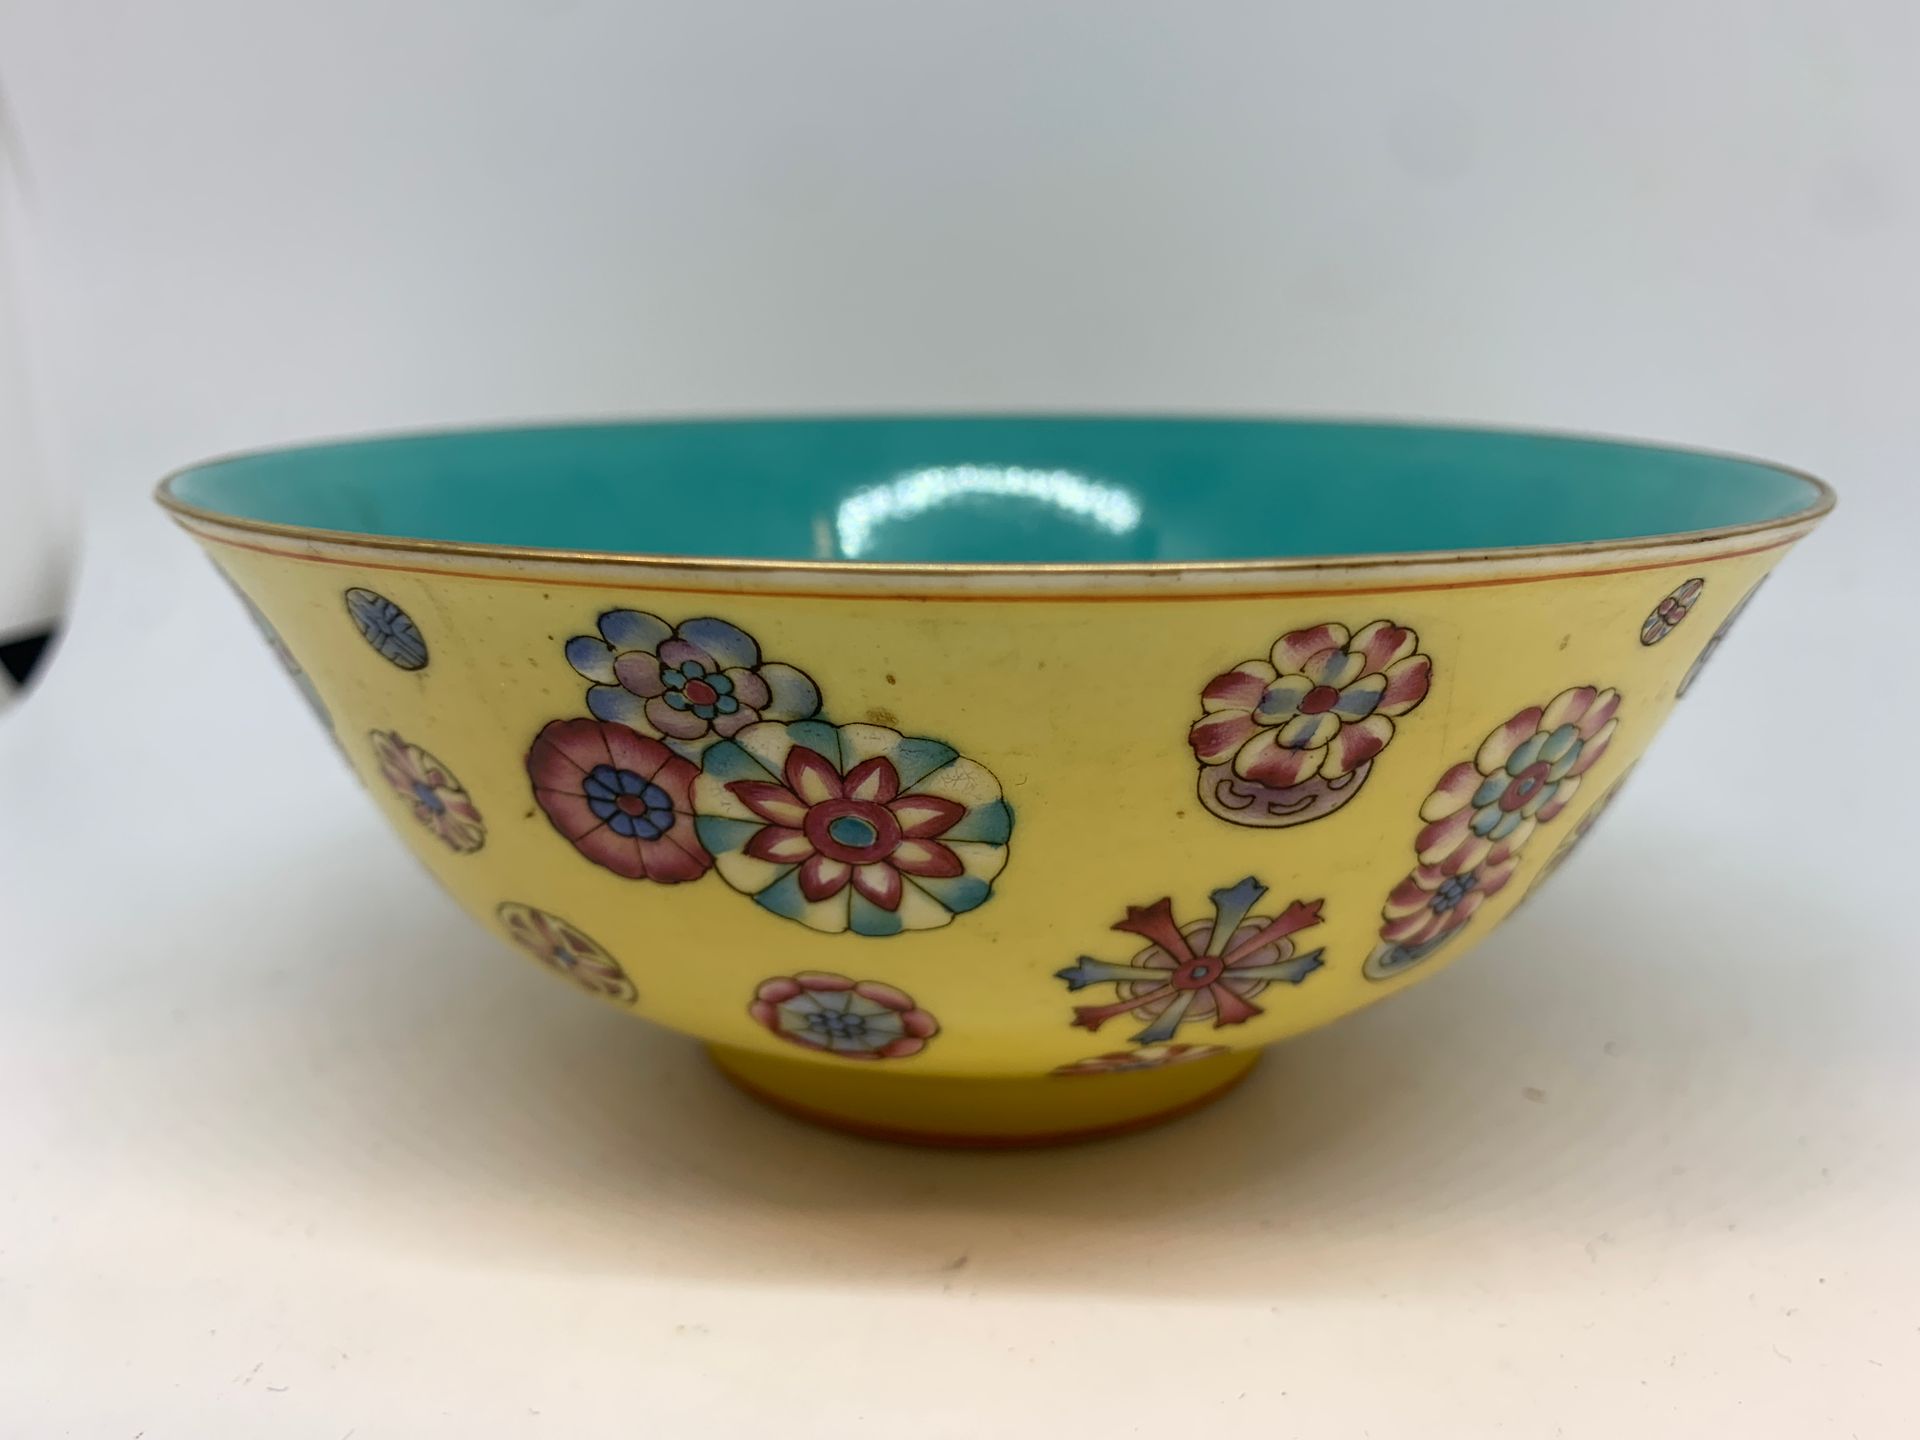 Null CHINA
Porcelain bowl with polychrome decoration on a yellow background of f&hellip;